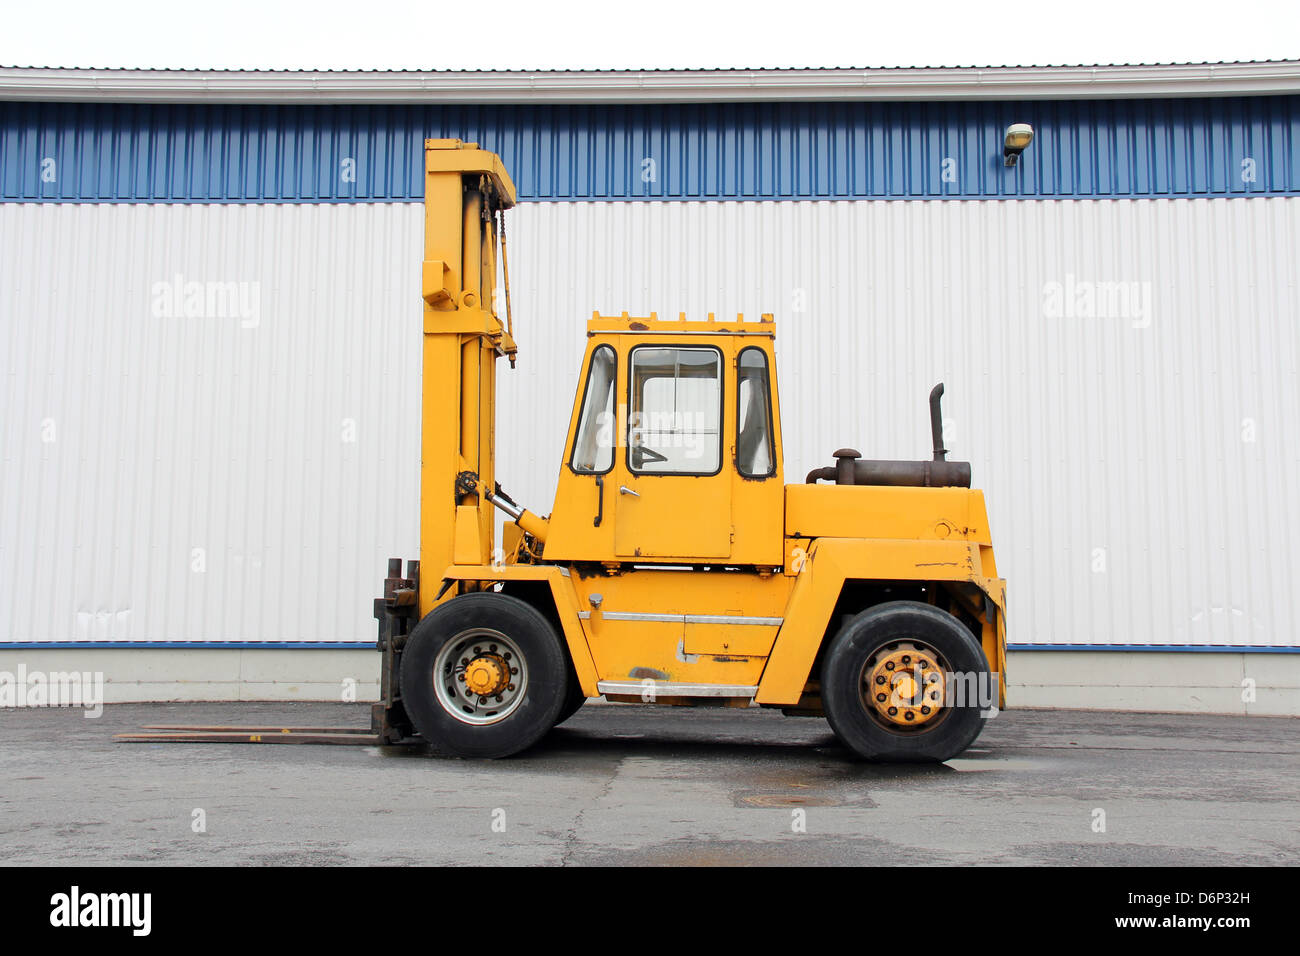 Yellow forklift truck by an industrial building. Stock Photo